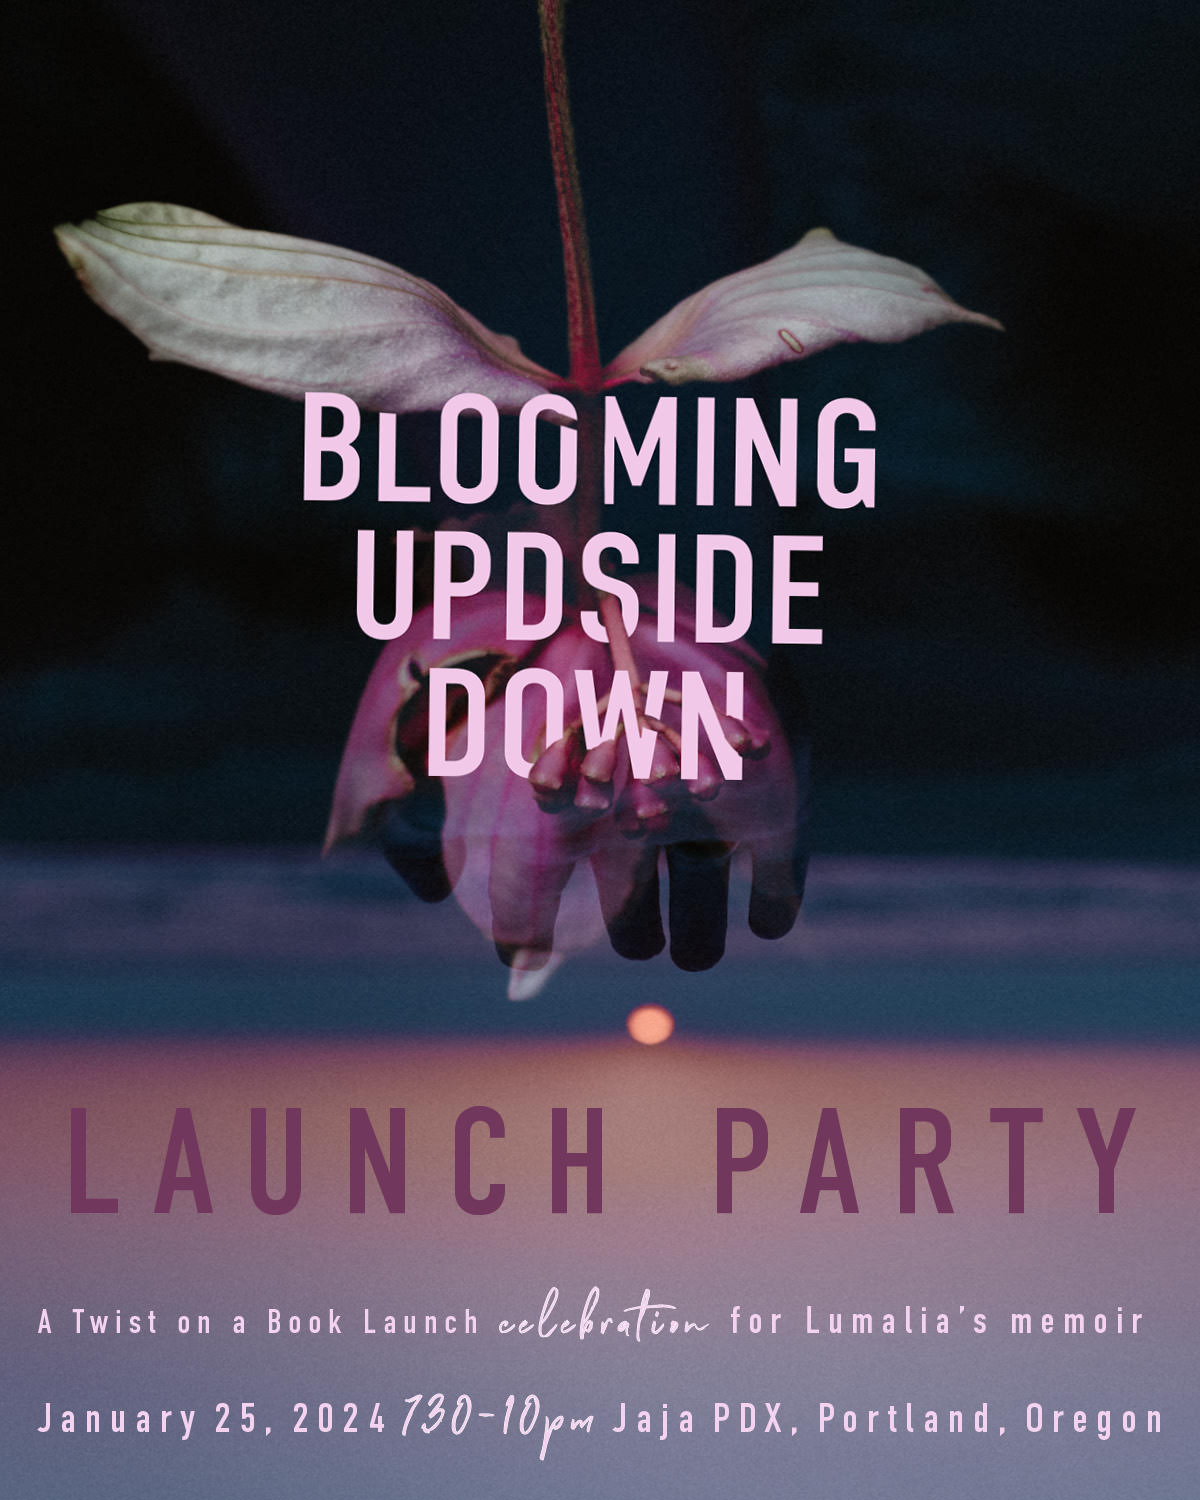 somatic experience poster "blooming upside down launch party A Twist on a Book Launch celebration for Lumalia’s memoir January 25, 2024 7:30pm -10:00pm Jaja PDX Portland, Oregon" click for blog post to purchase tickets over a photo of a flower blooming upside down over an image of a hand out to the setting sun